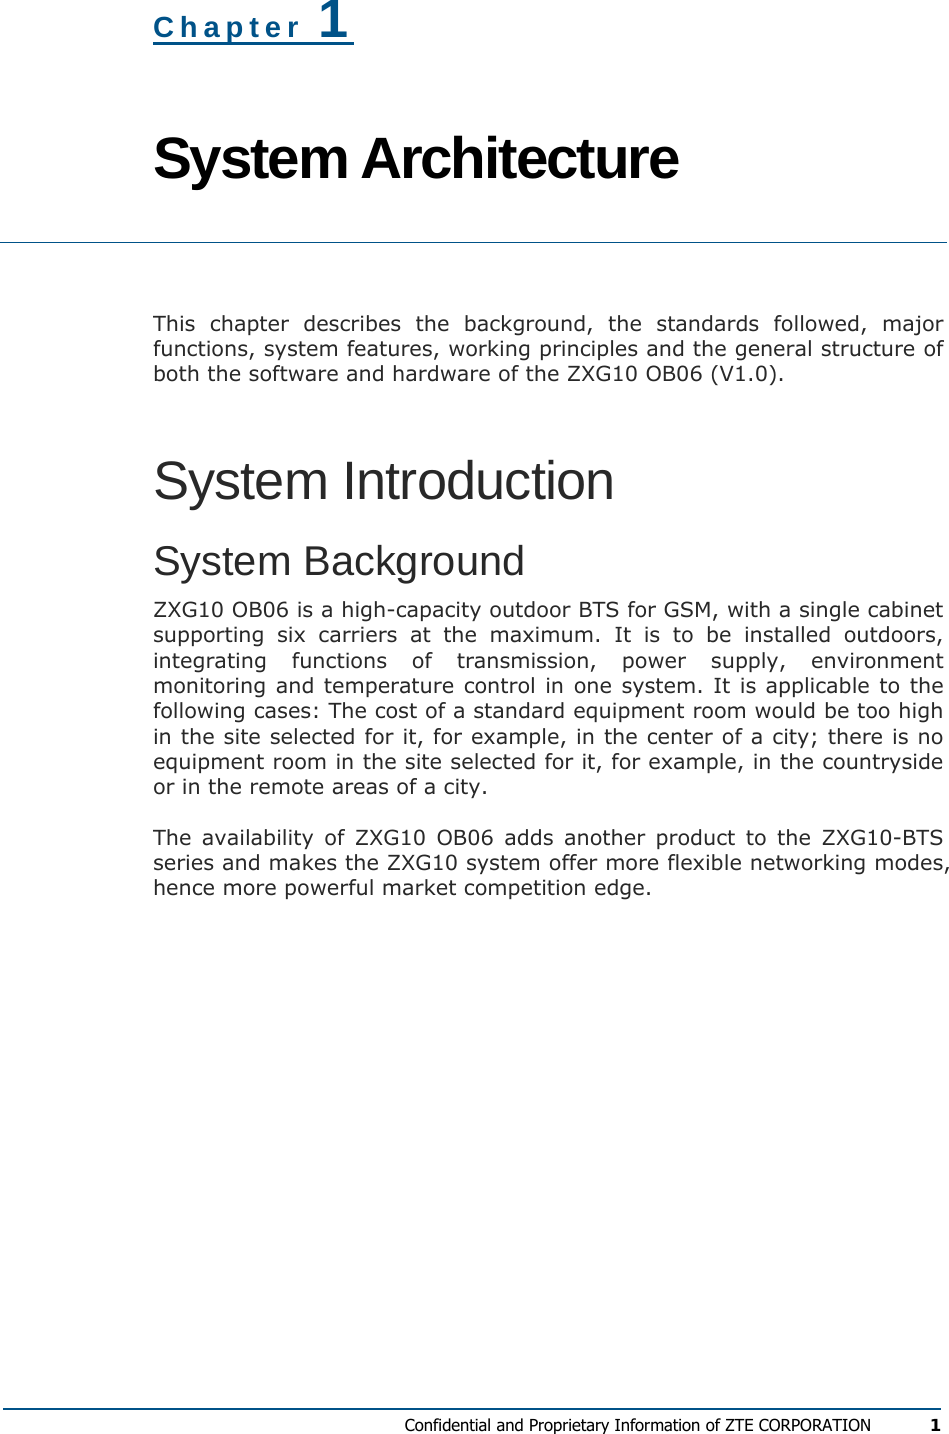  Confidential and Proprietary Information of ZTE CORPORATION 1 Chapter 1 System Architecture  This chapter describes the background, the standards followed, major functions, system features, working principles and the general structure of both the software and hardware of the ZXG10 OB06 (V1.0). System Introduction System Background ZXG10 OB06 is a high-capacity outdoor BTS for GSM, with a single cabinet supporting six carriers at the maximum. It is to be installed outdoors, integrating functions of transmission, power supply, environment monitoring and temperature control in one system. It is applicable to the following cases: The cost of a standard equipment room would be too high in the site selected for it, for example, in the center of a city; there is no equipment room in the site selected for it, for example, in the countryside or in the remote areas of a city. The availability of ZXG10 OB06 adds another product to the ZXG10-BTS series and makes the ZXG10 system offer more flexible networking modes, hence more powerful market competition edge. 